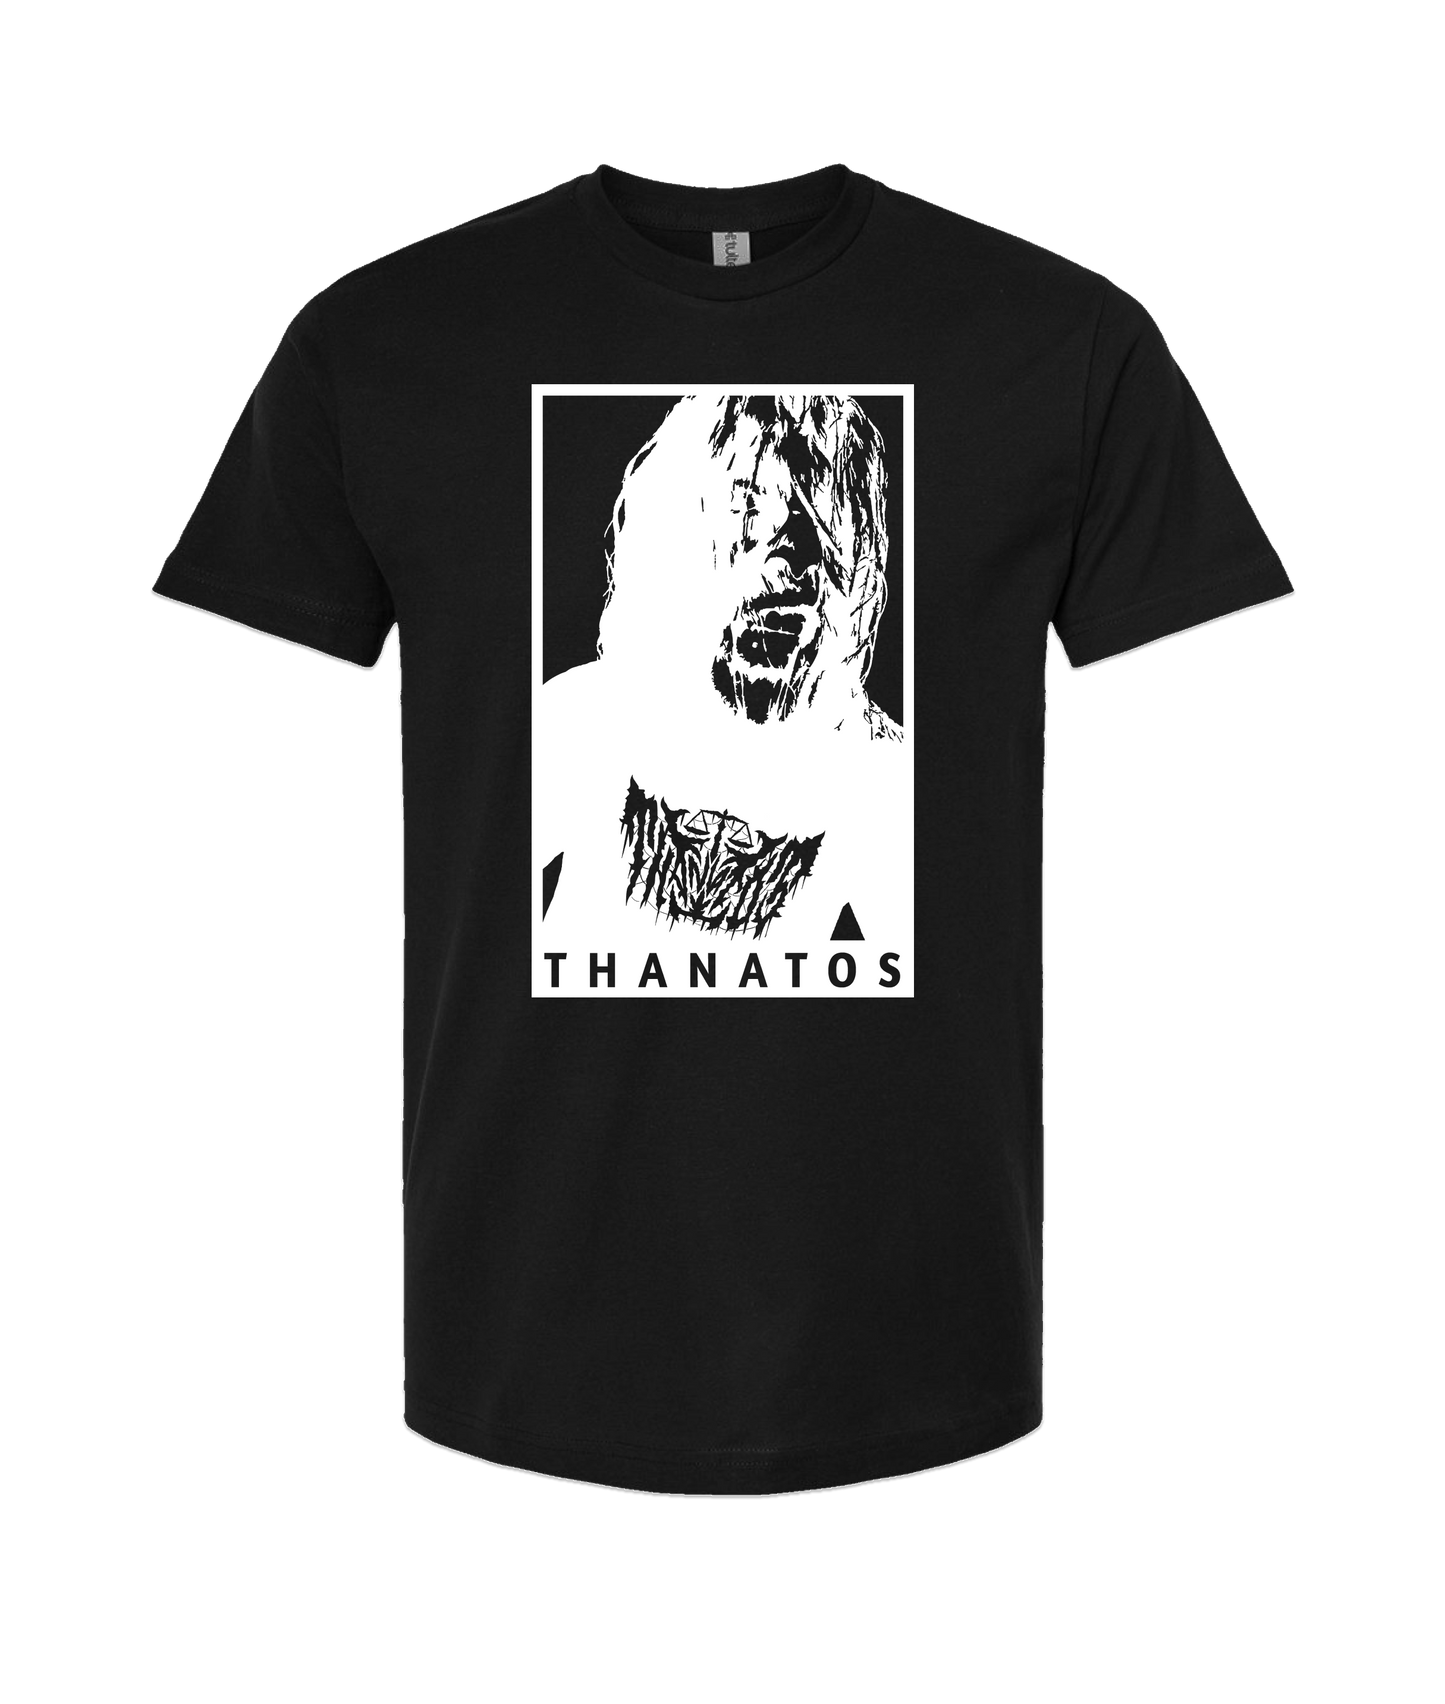 Thanatos - Better the Devil You Know Than the One You Don't - Black T Shirt